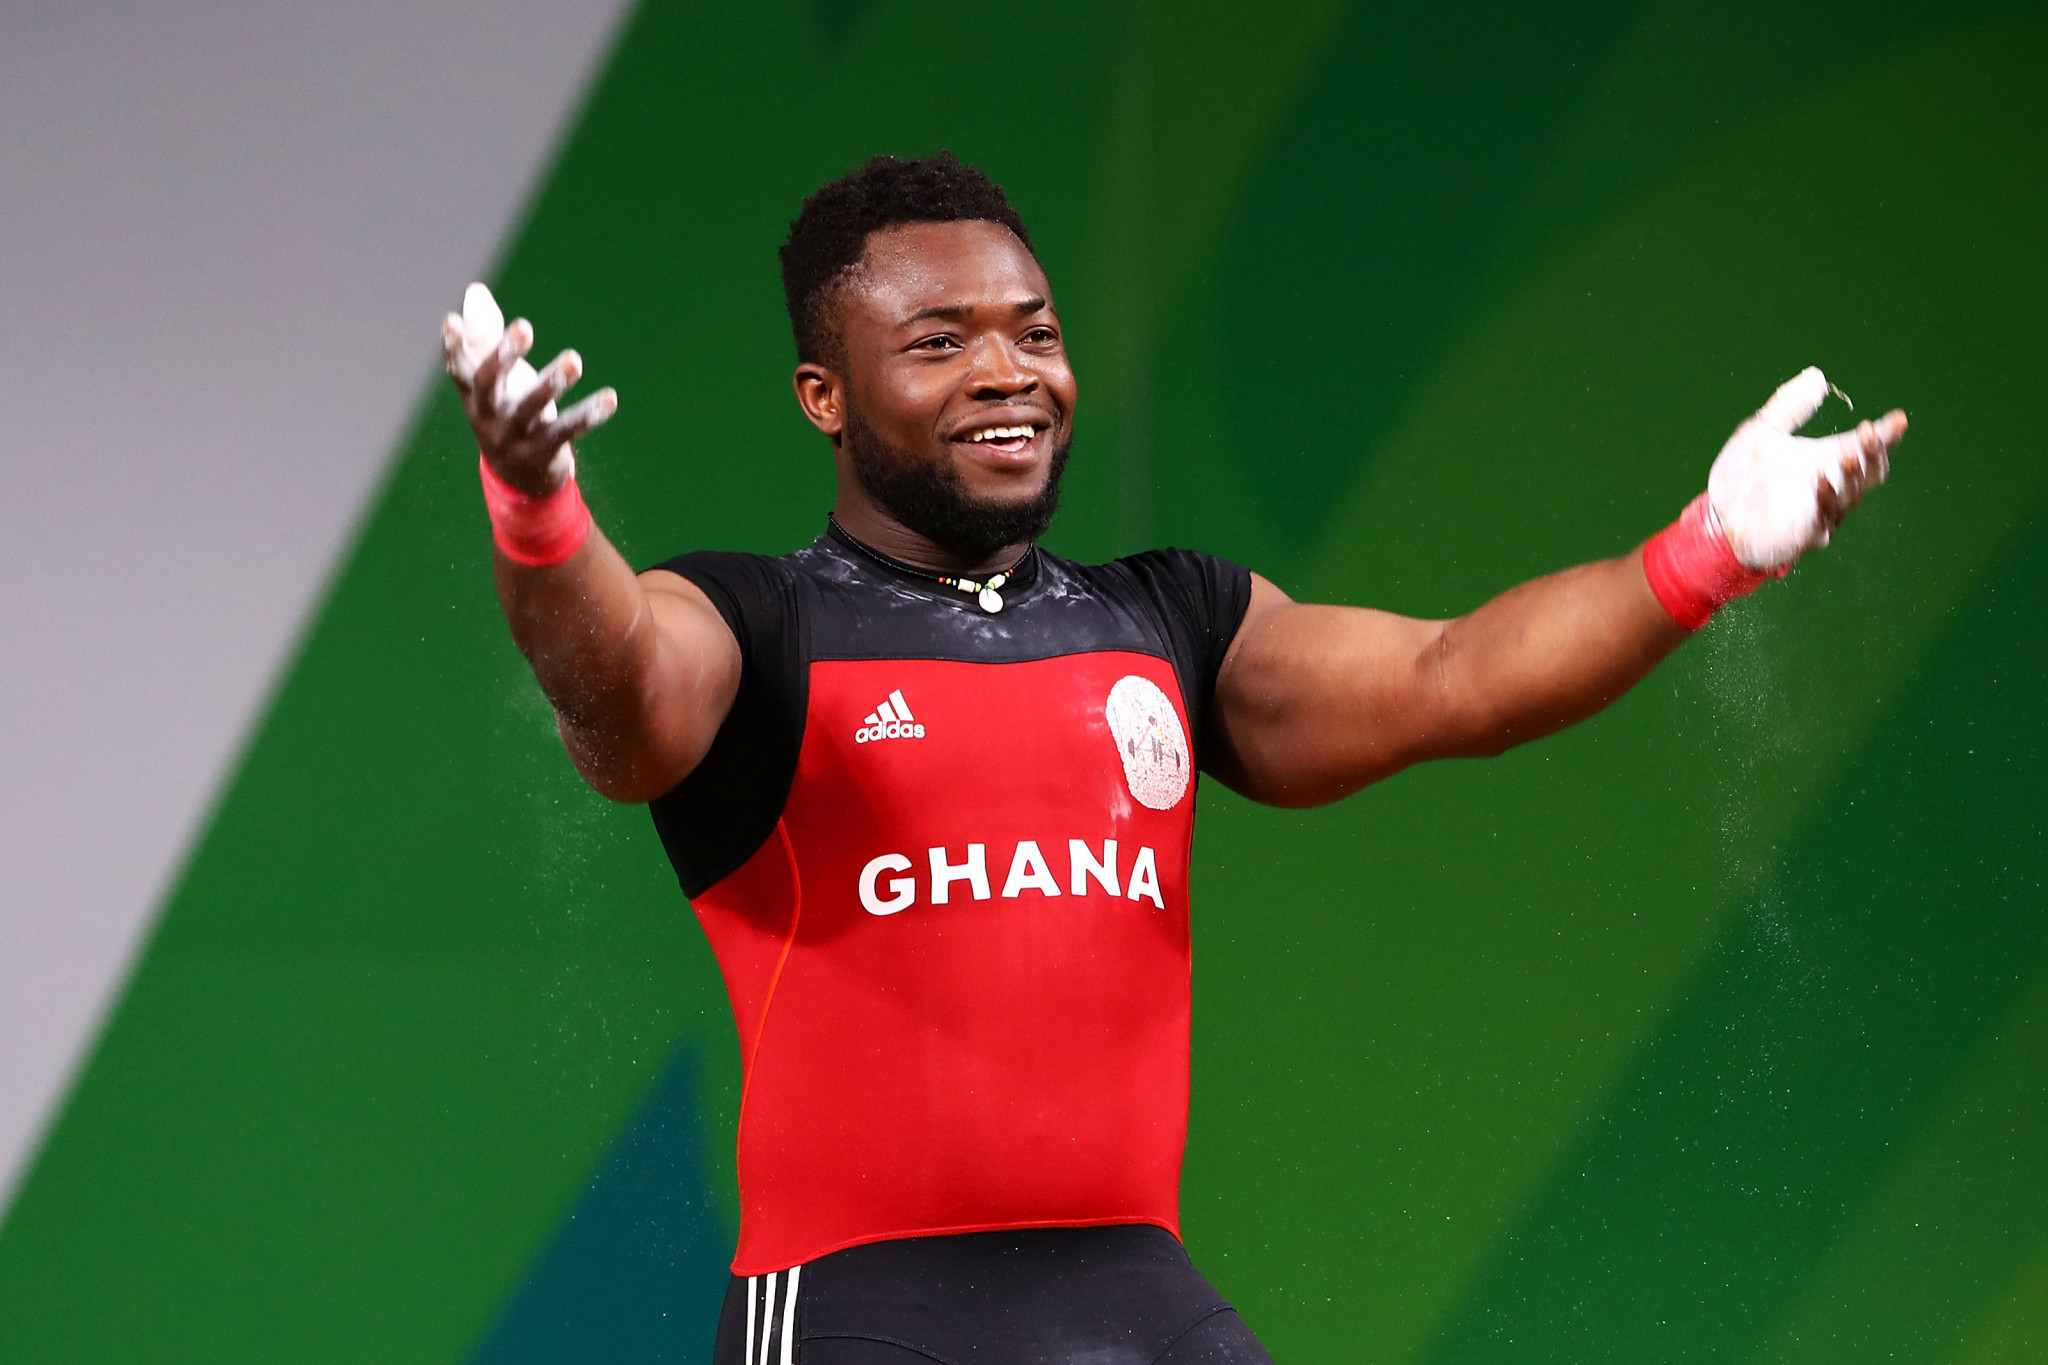 Olympic champions Dimas and Charron to help select weightlifters for $3,000 scholarships